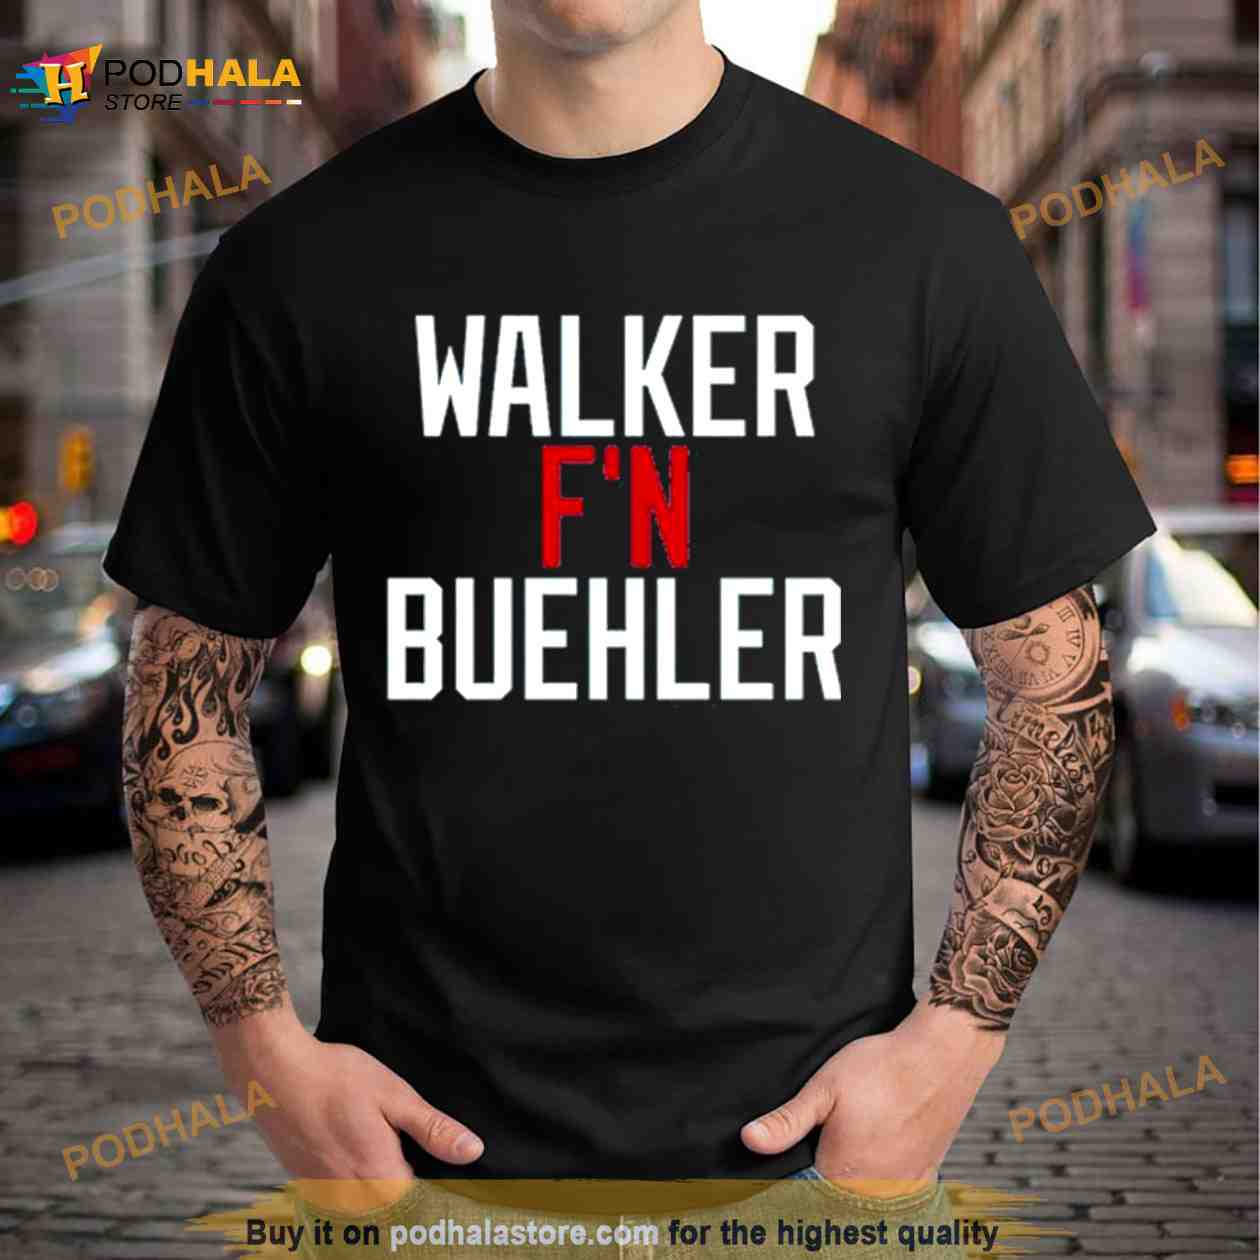 Walker F'n Buehler Shirt - Bring Your Ideas, Thoughts And